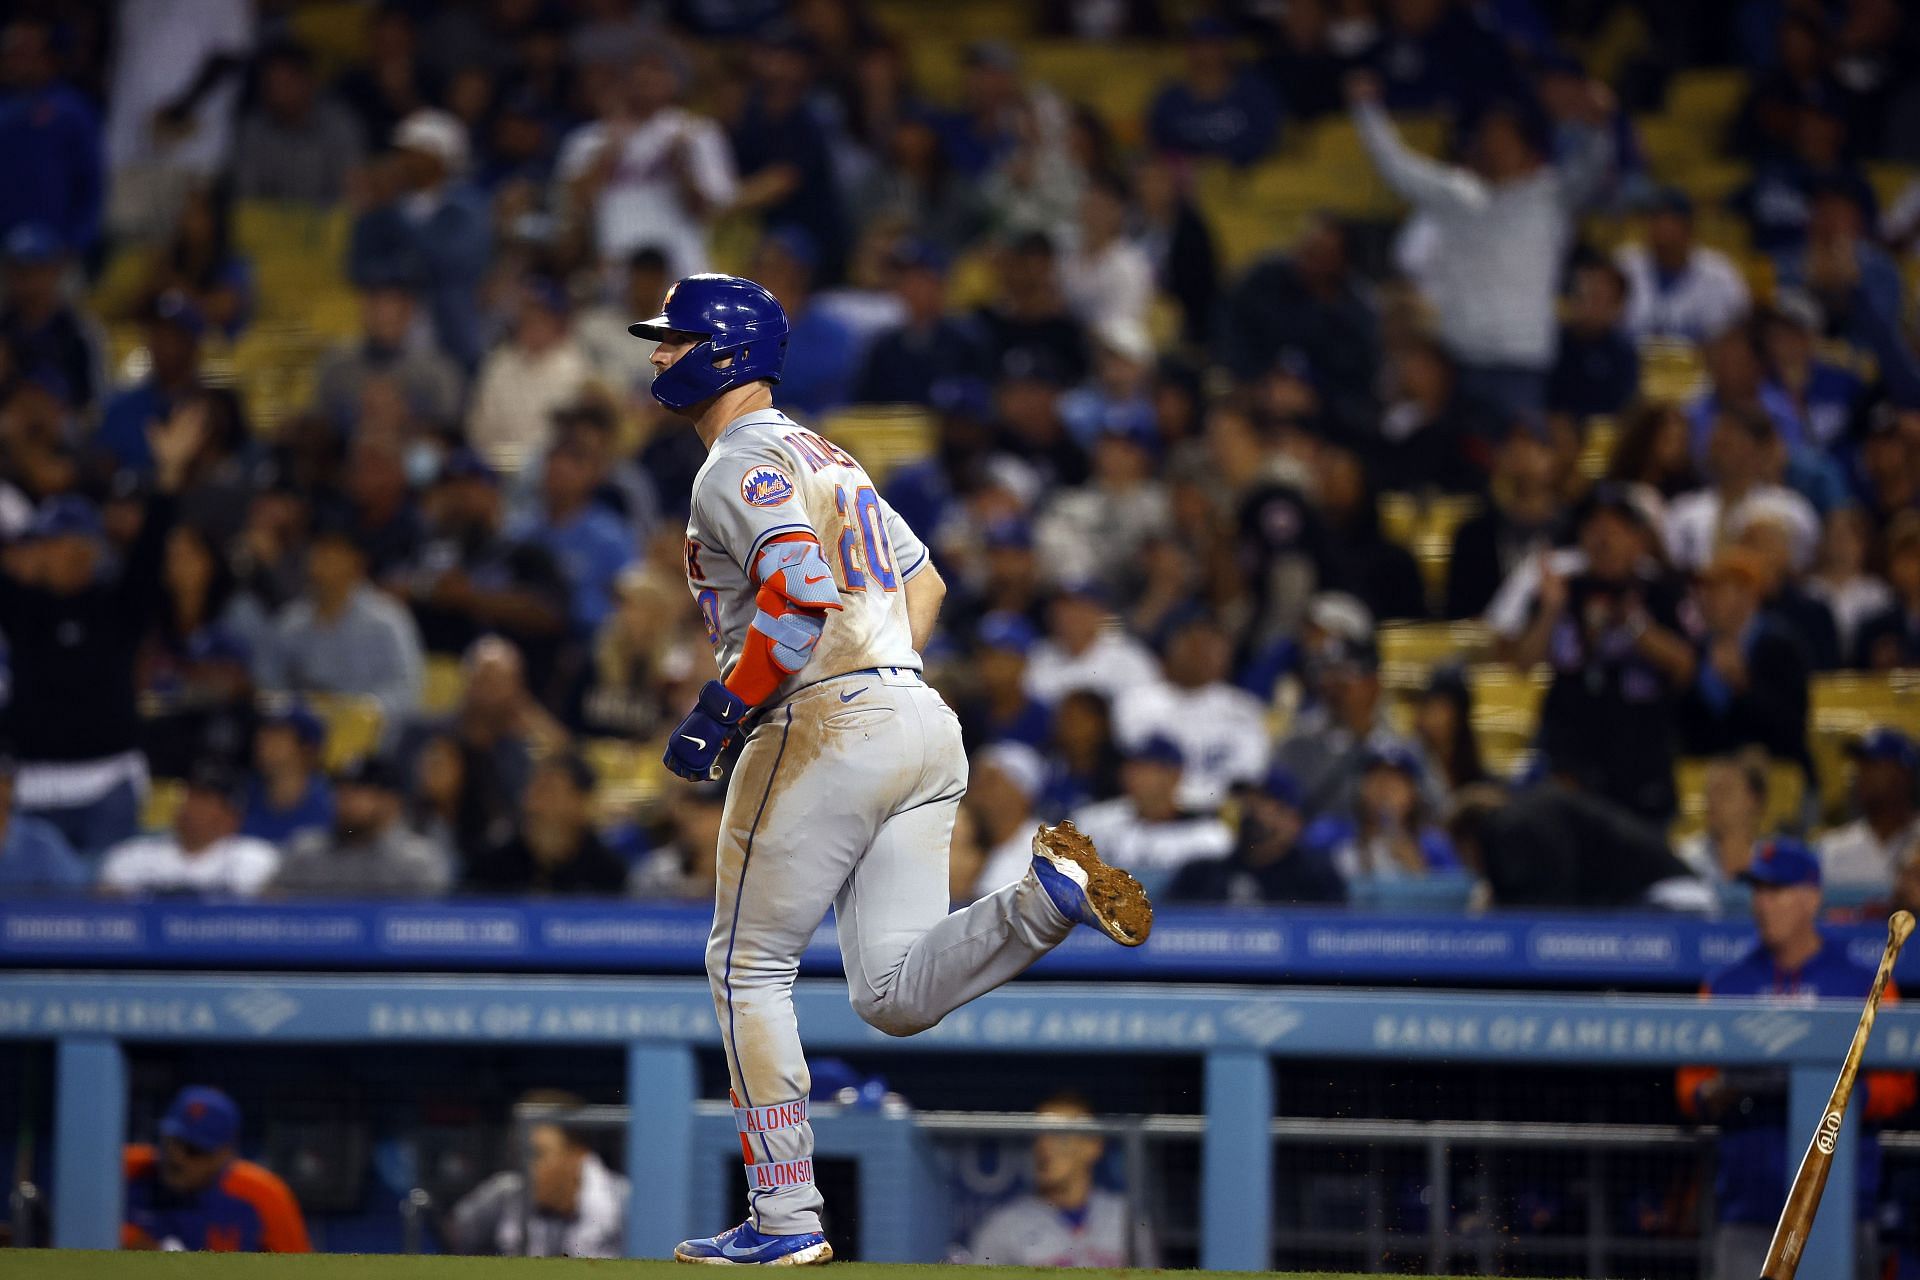 WAY TO RESPOND PETE!!!” - NBA star Donovan Mitchell proves to be a New York  Mets fan as he cheers on Pete Alonso's huge night